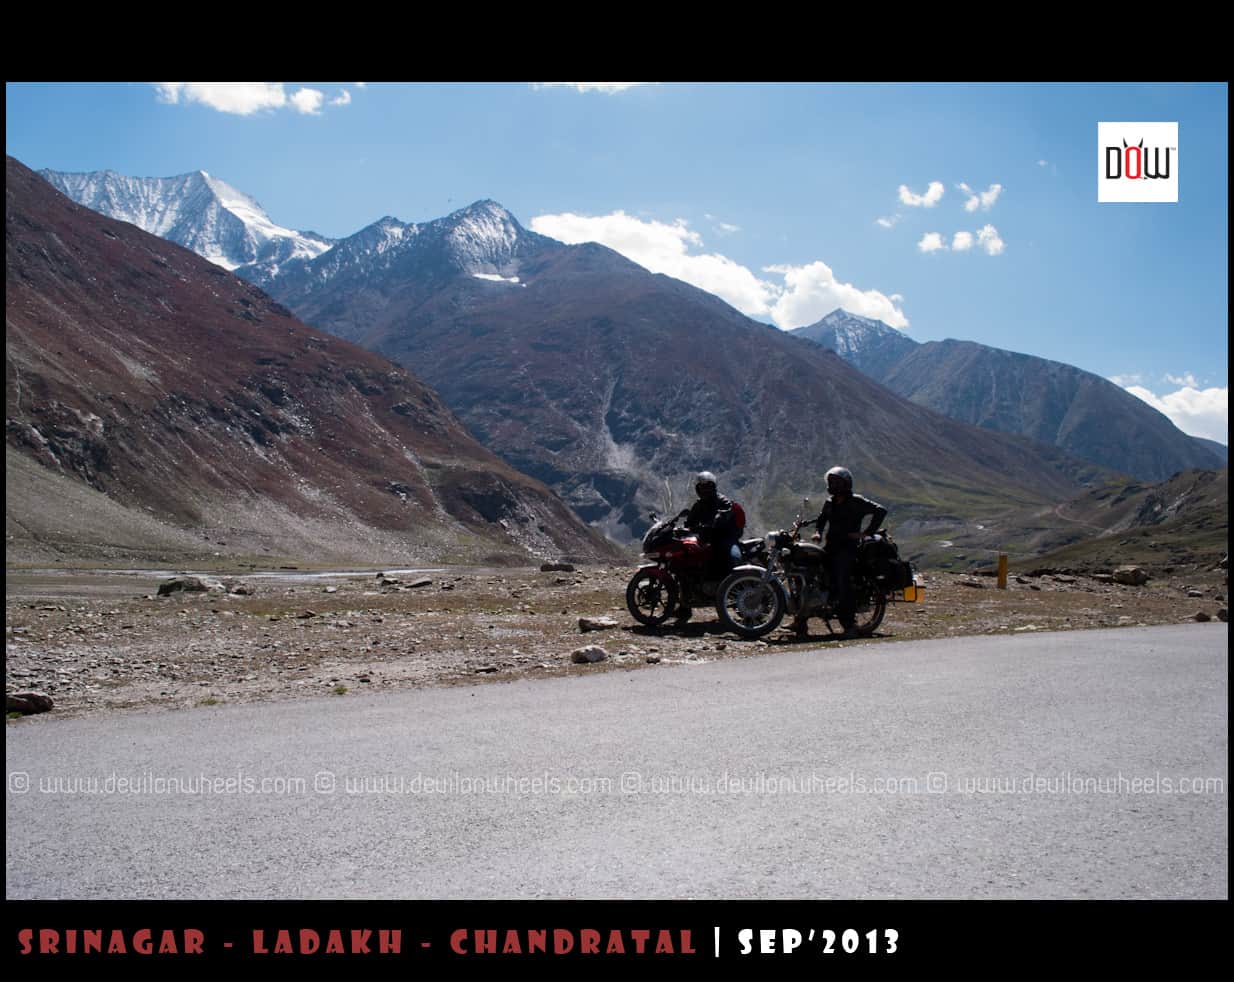 The Two Bikers of our group on Srinagar - Leh Highway